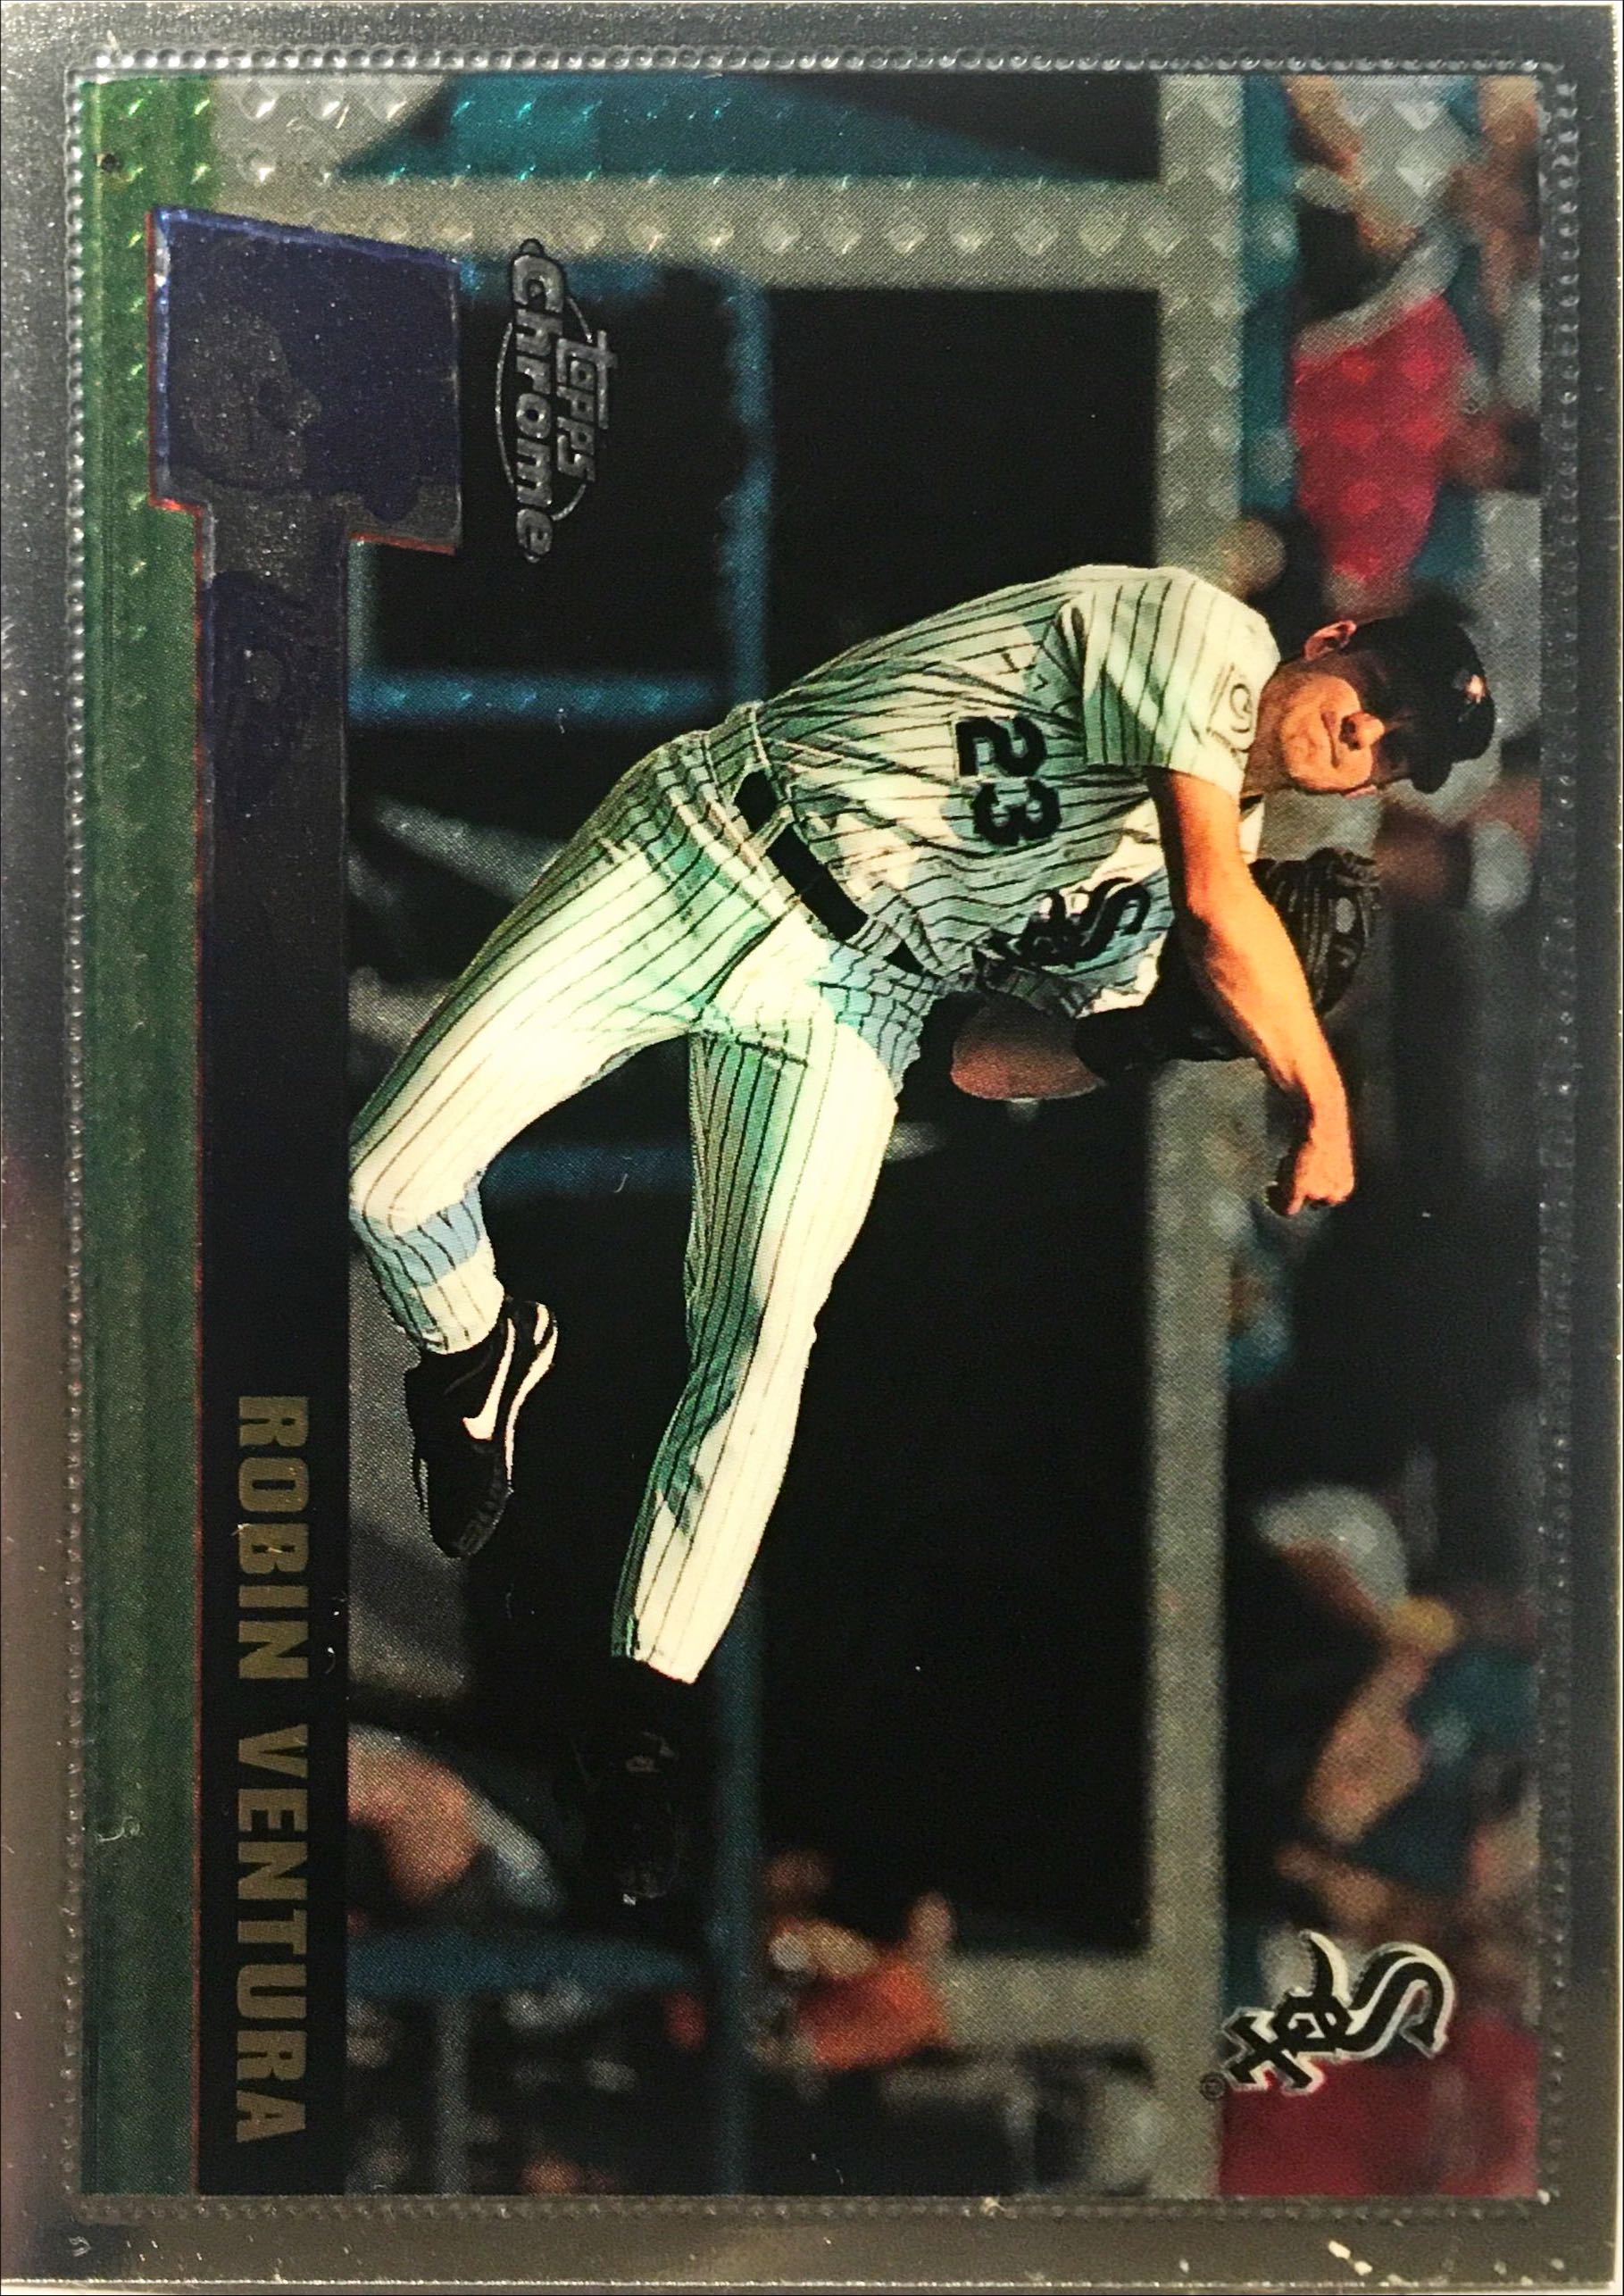 1996 Topps Chrome 124 front image